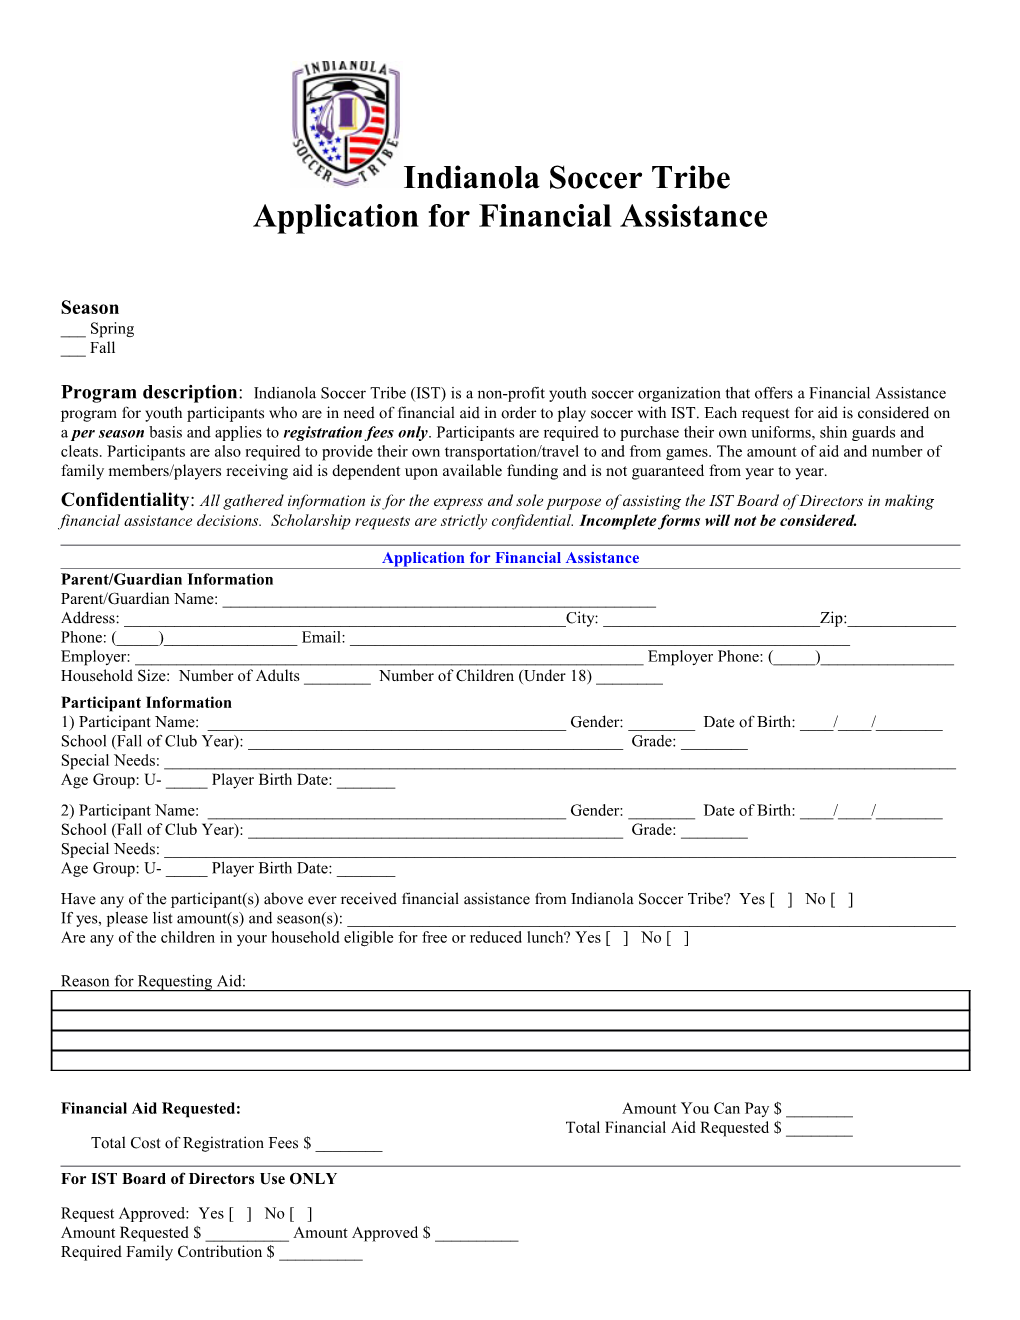 Application for Financial Assistance s4